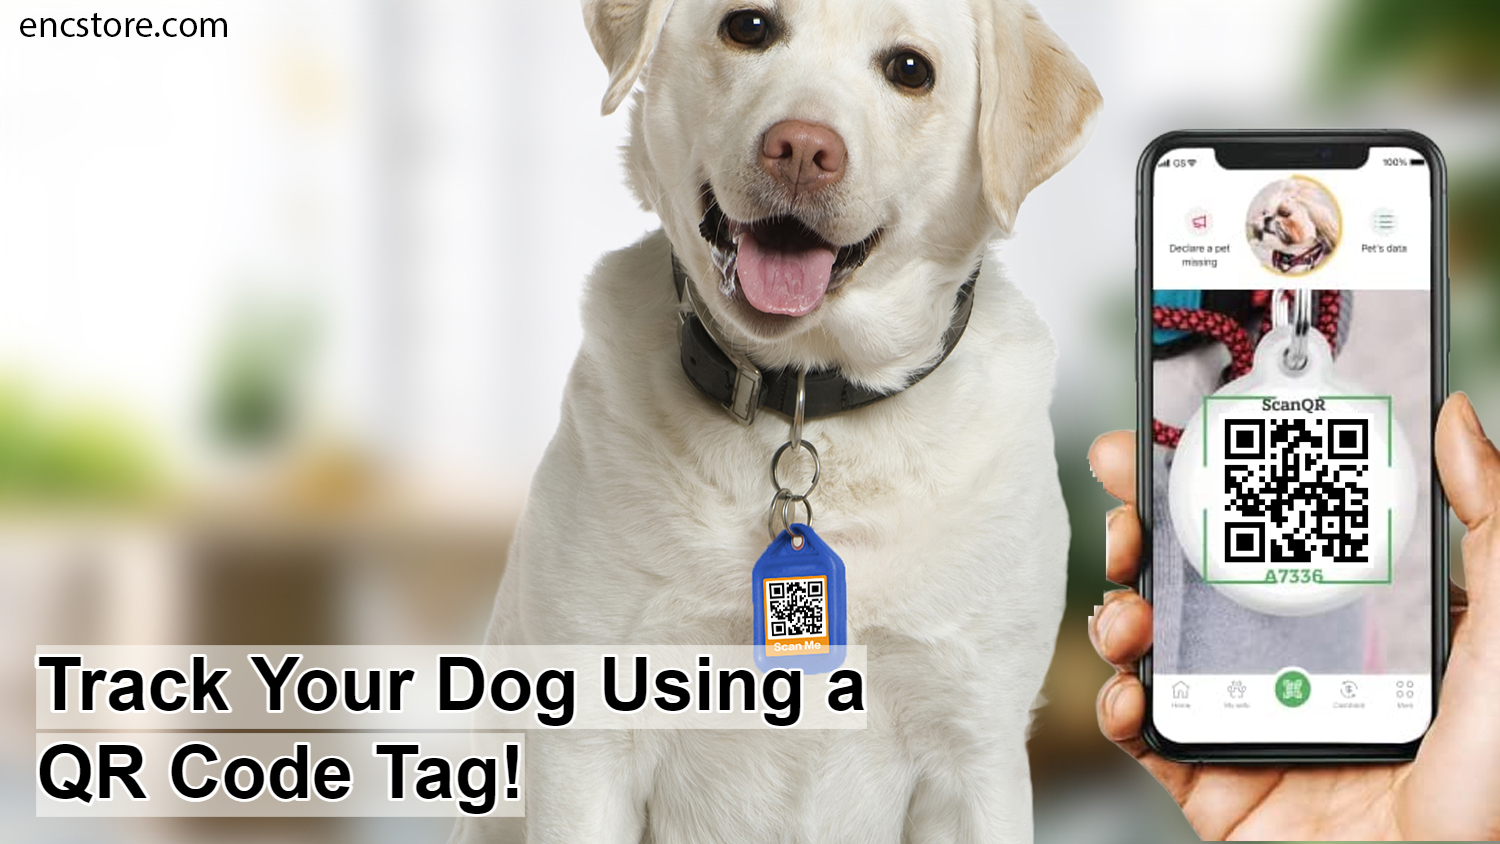 Track Your Dog Using a QR Code Tag!